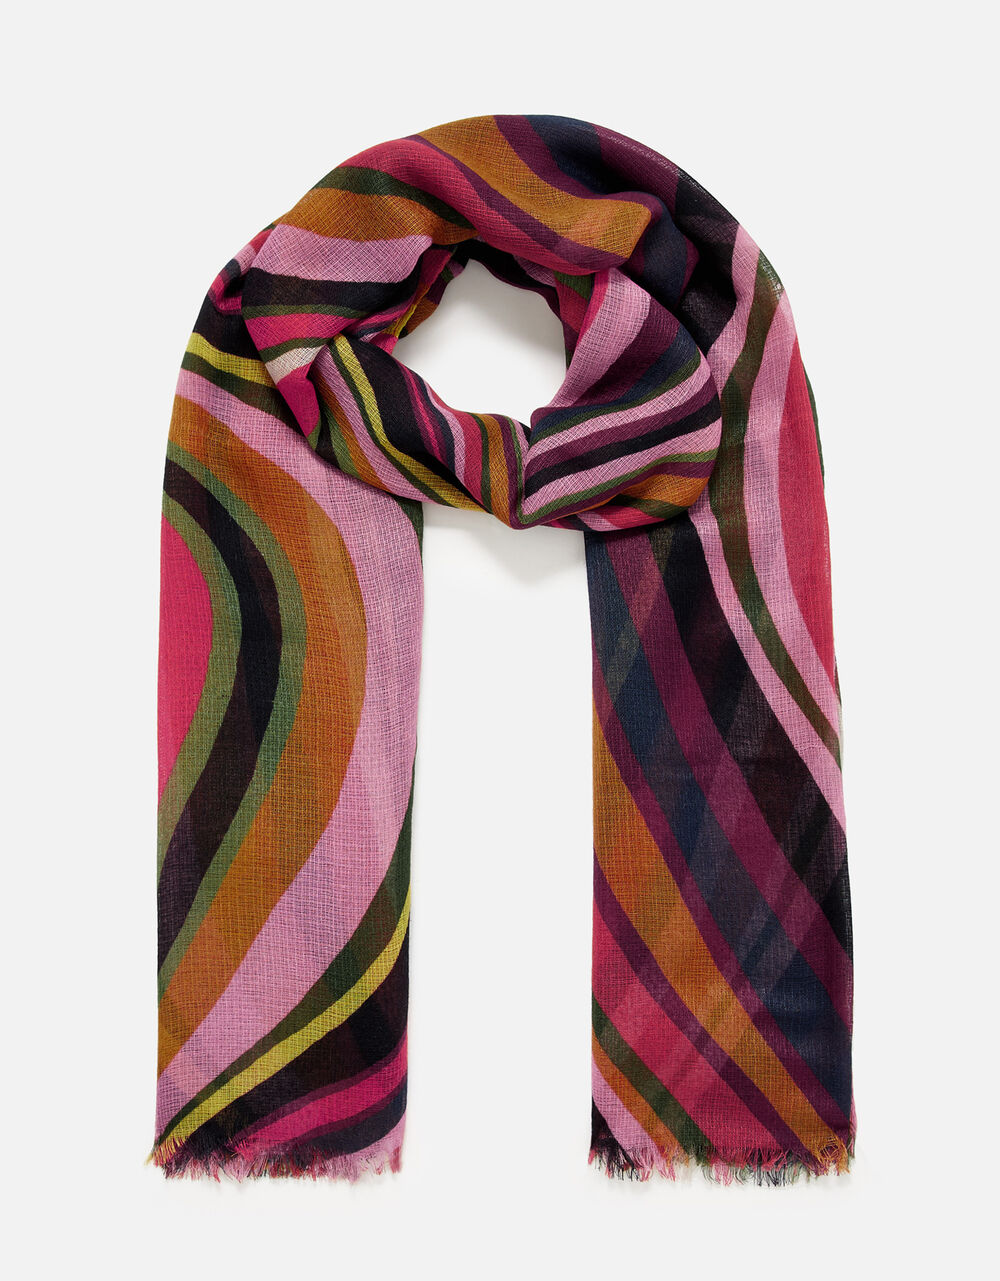 Retro Swirl Scarf in Recycled Polyester | Lightweight scarves ...